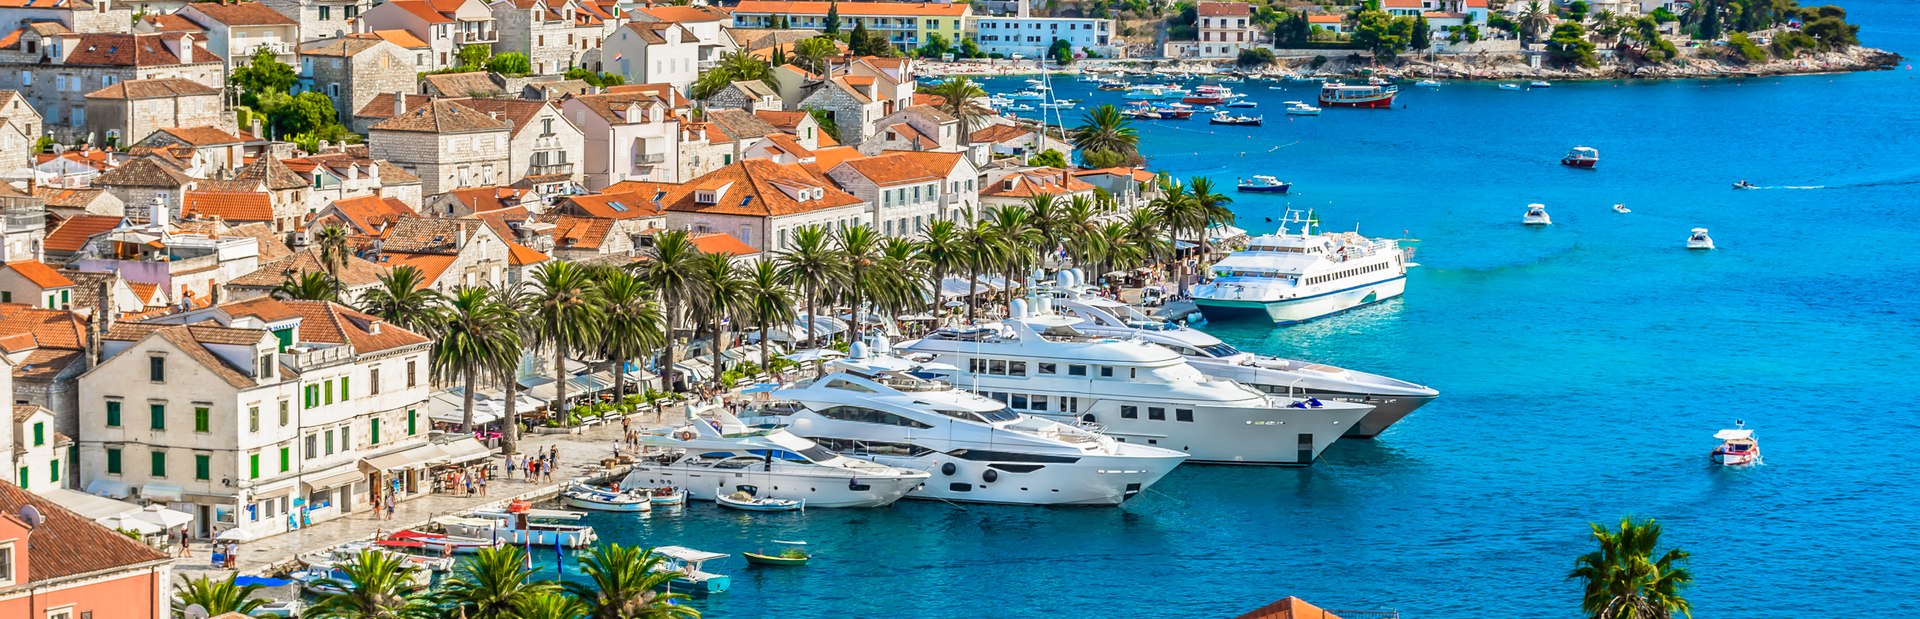 COVID-19: Where Can I Travel from the UK & Europe for Yacht Charters in 2022?